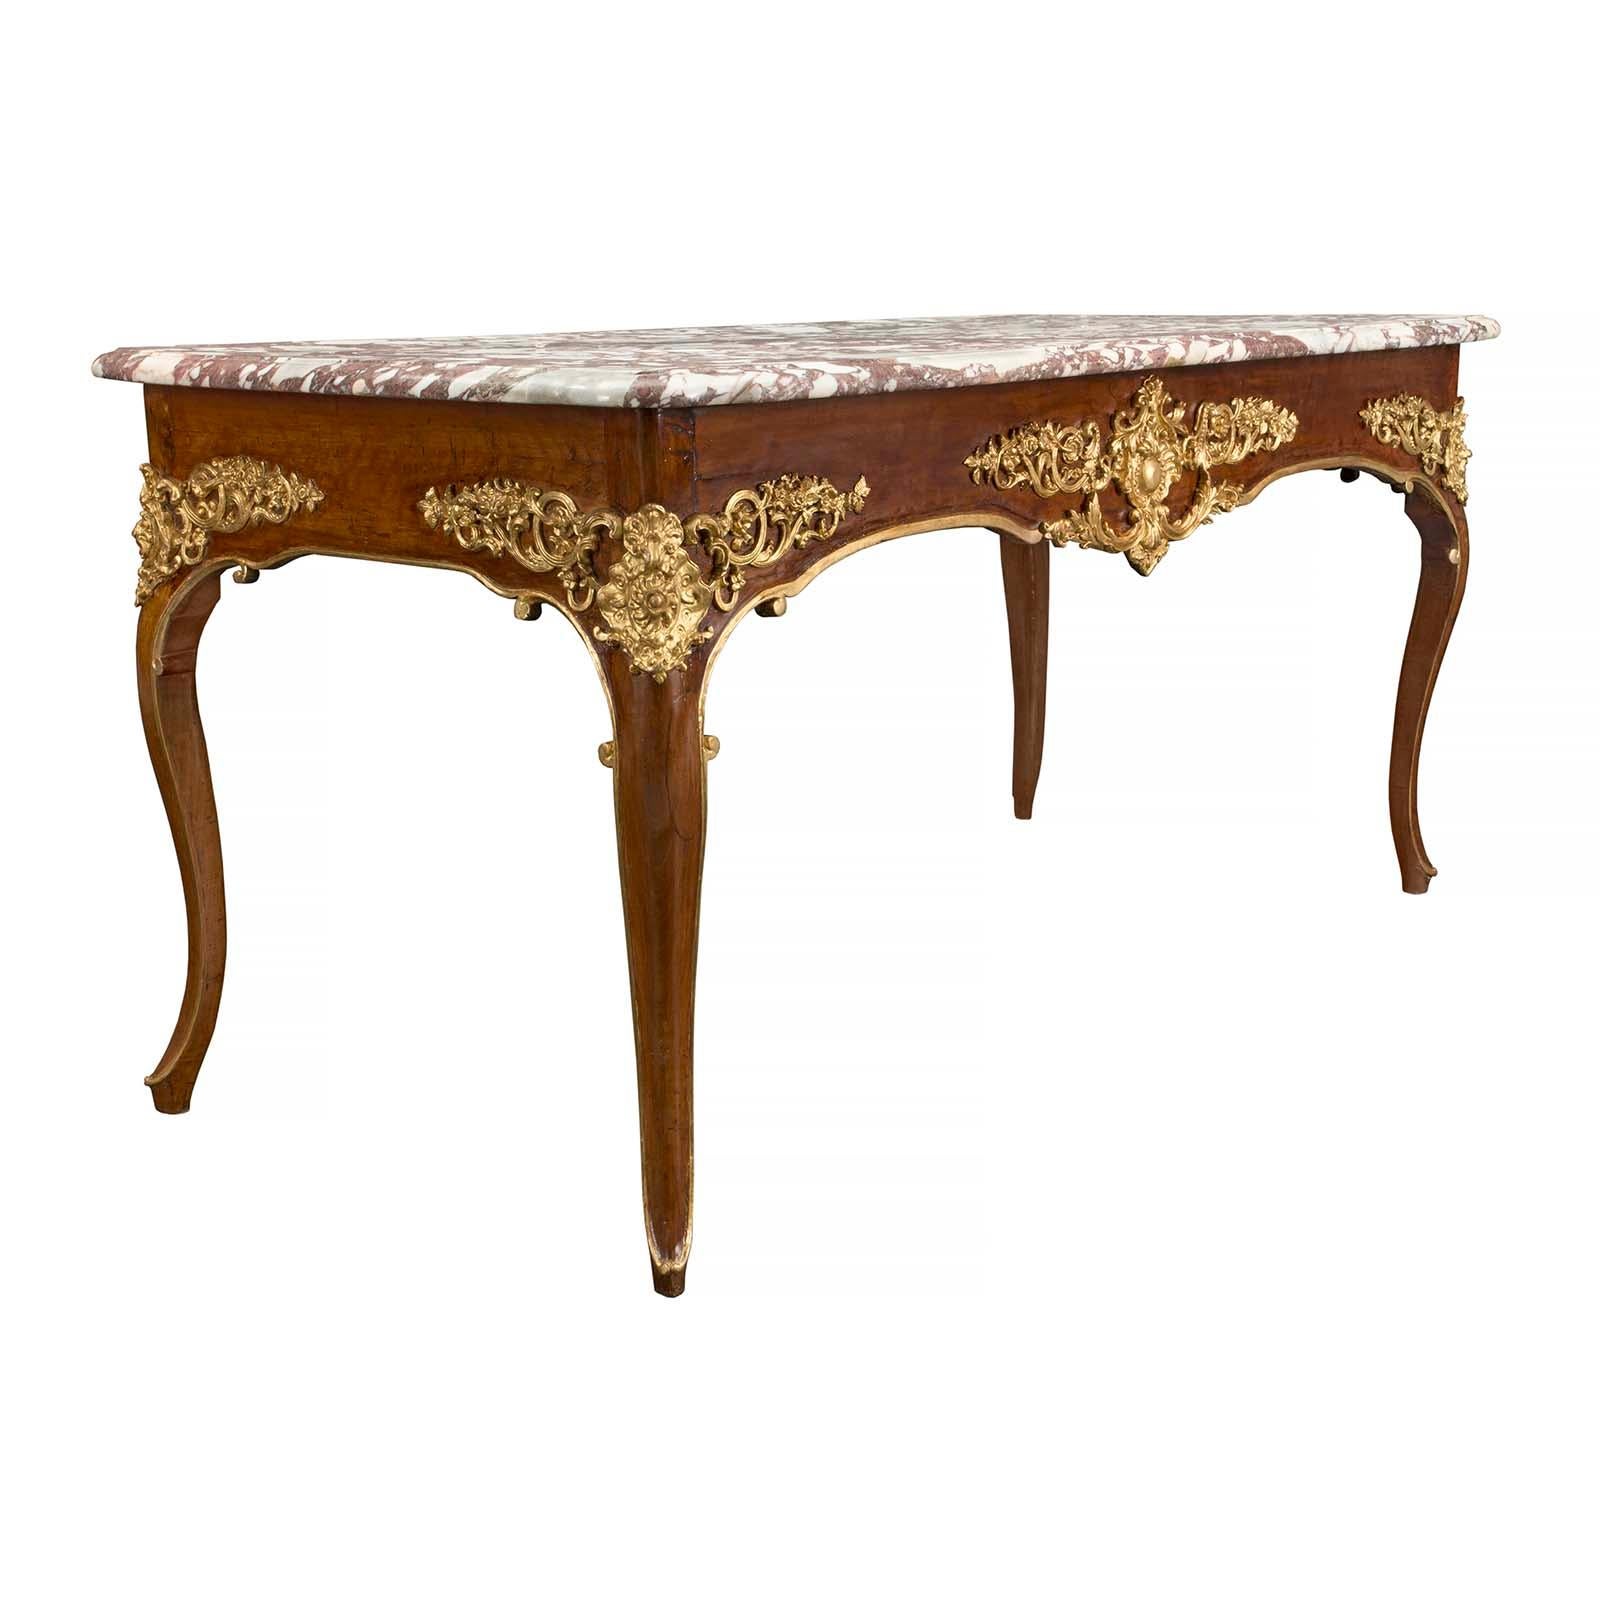 Continental 18th Century Louis XV Period Rectangular Walnut Centre Table In Good Condition For Sale In West Palm Beach, FL